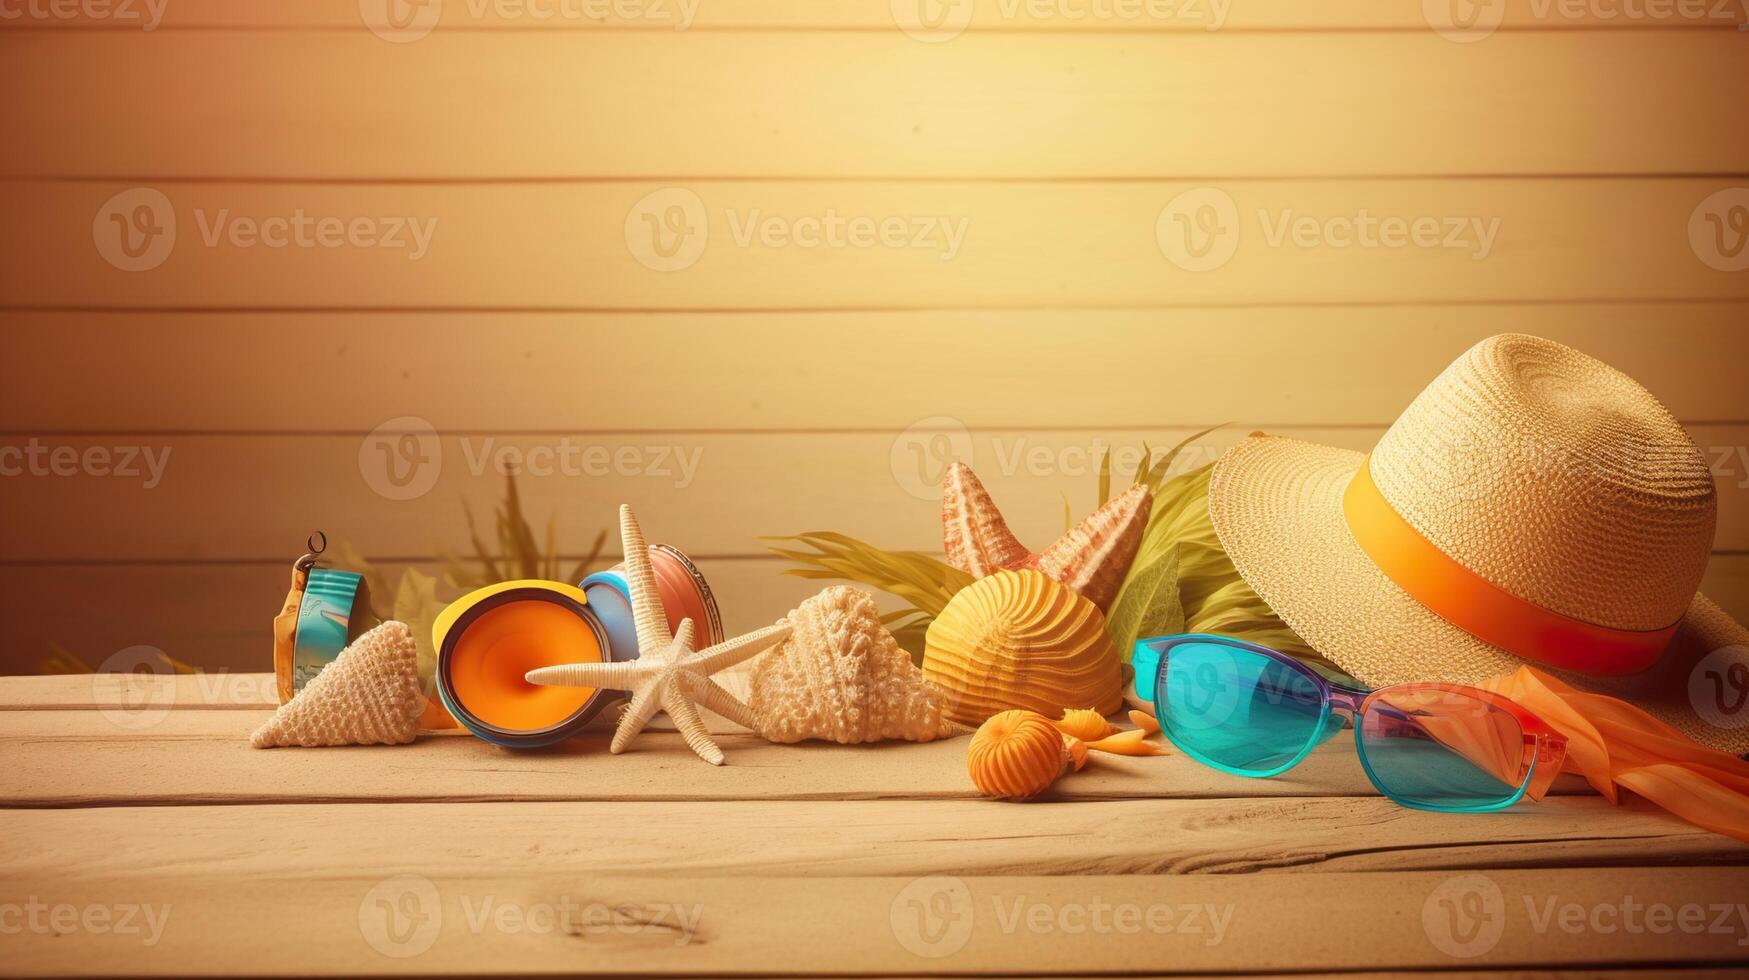 of a set of beach elements and fruit photo